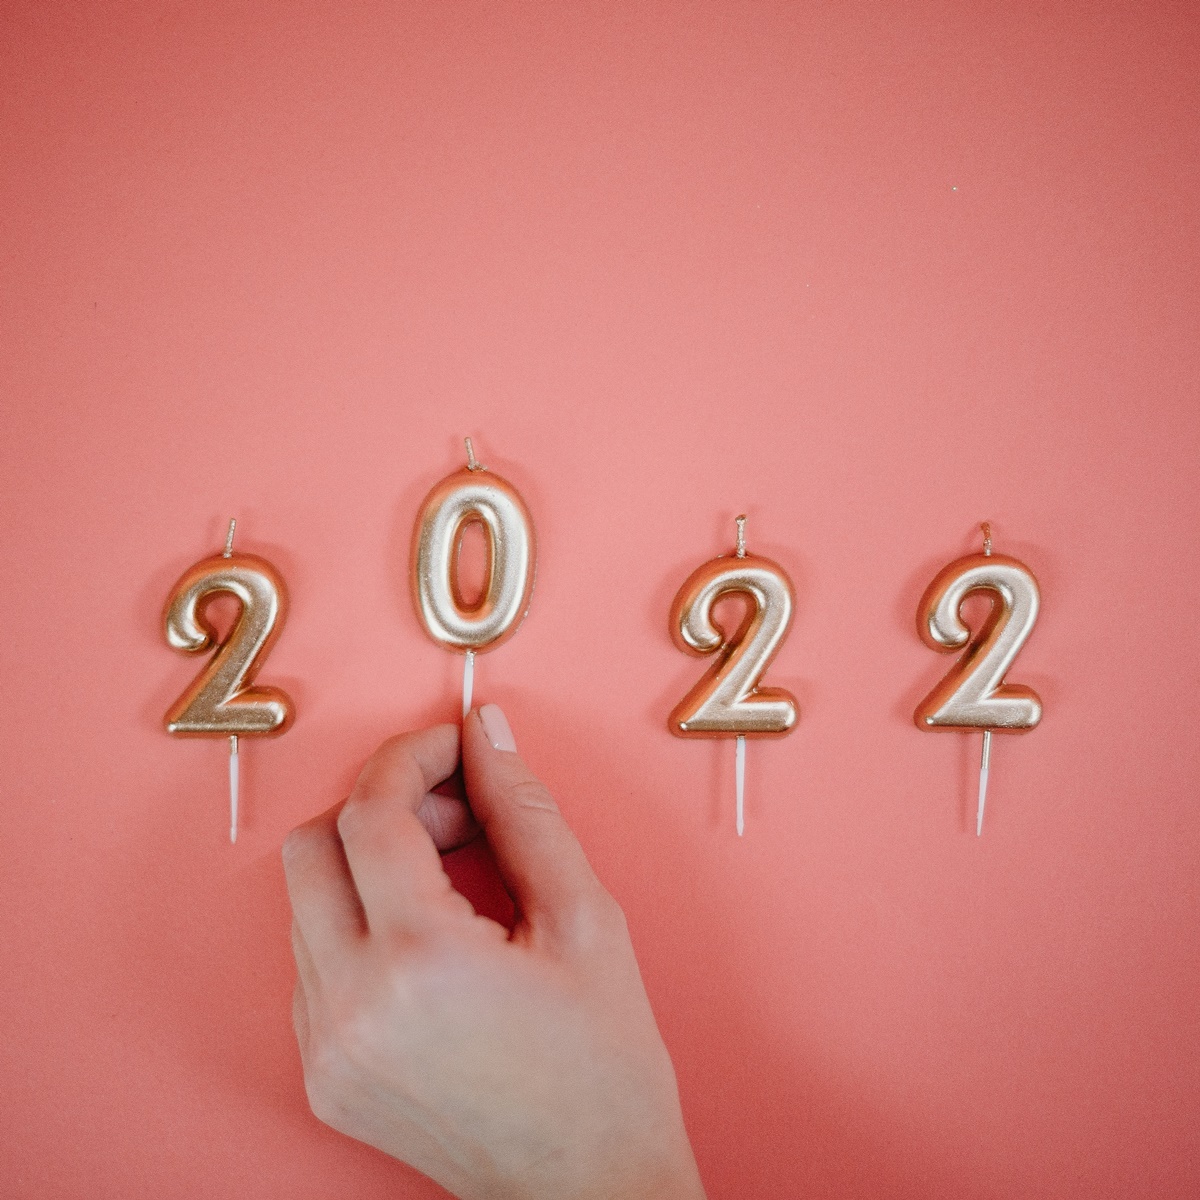 An Astro numerology expert reveals what the coming year has in store for you